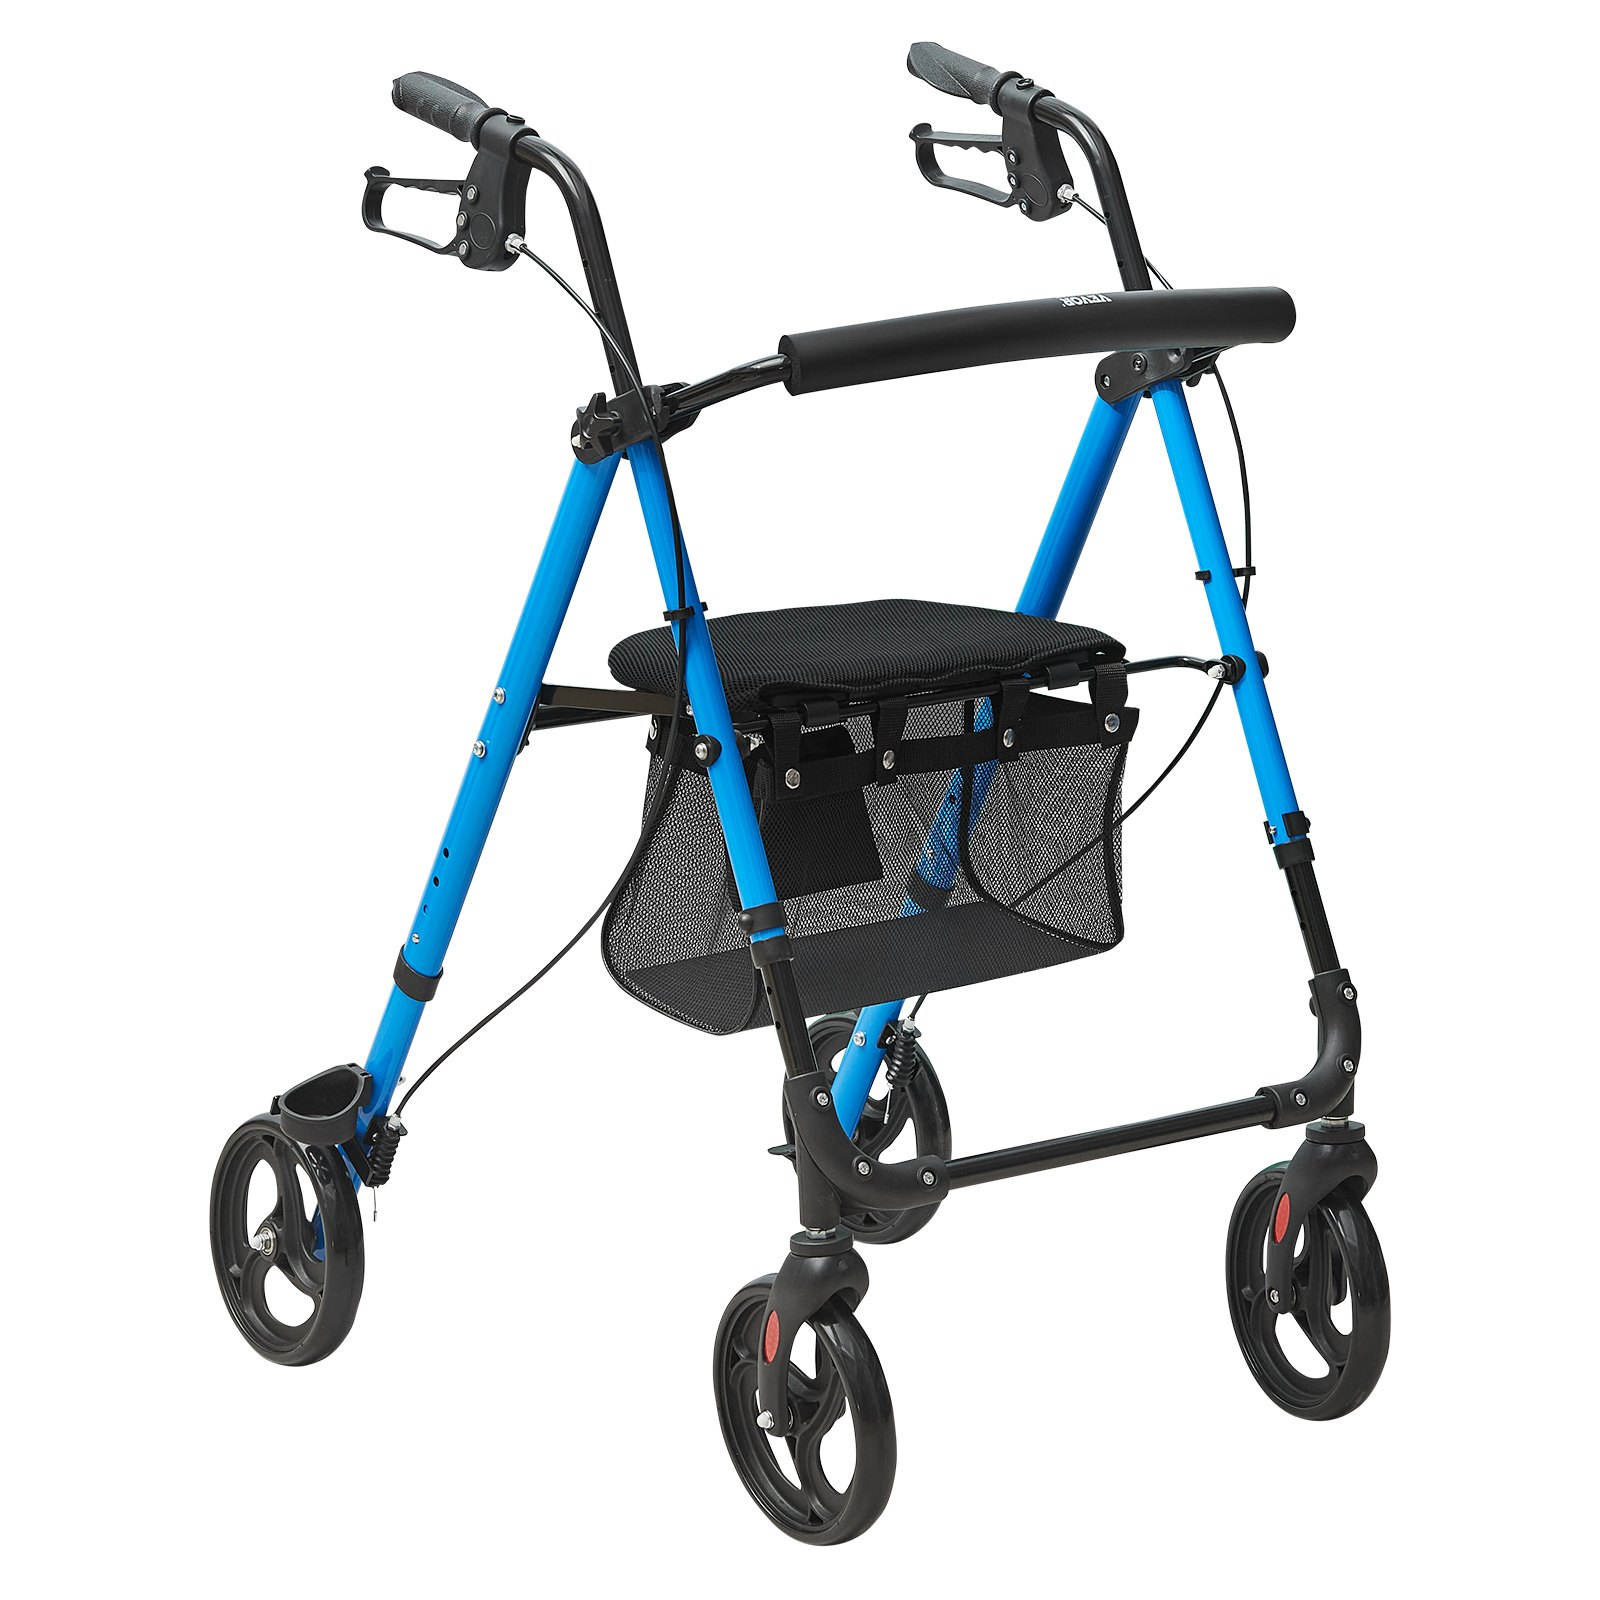 VEVOR Rollator Walker for Seniors and Adult, Lightweight Aluminum Foldable Rolling Walker with Adjustable Seat and Handle, Outdoor Mobility Rollator Walker with 8" All Terrain Wheels, 300LBS Capacity, Goodies N Stuff